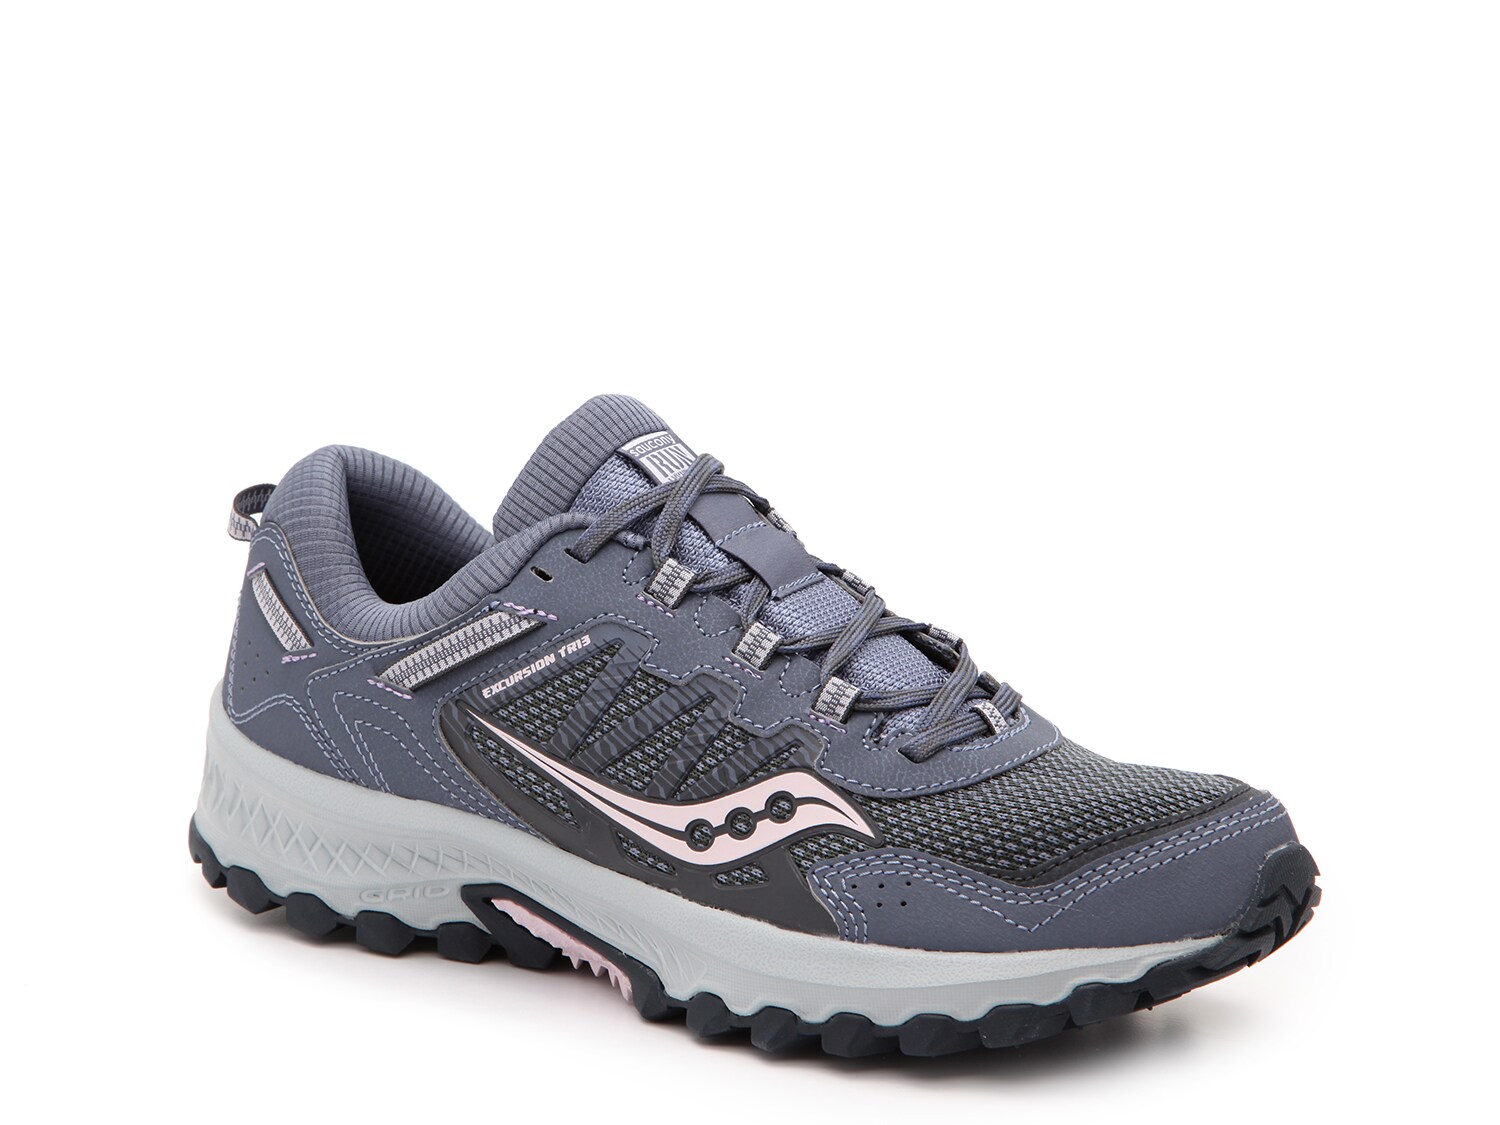 discount saucony womens running shoes